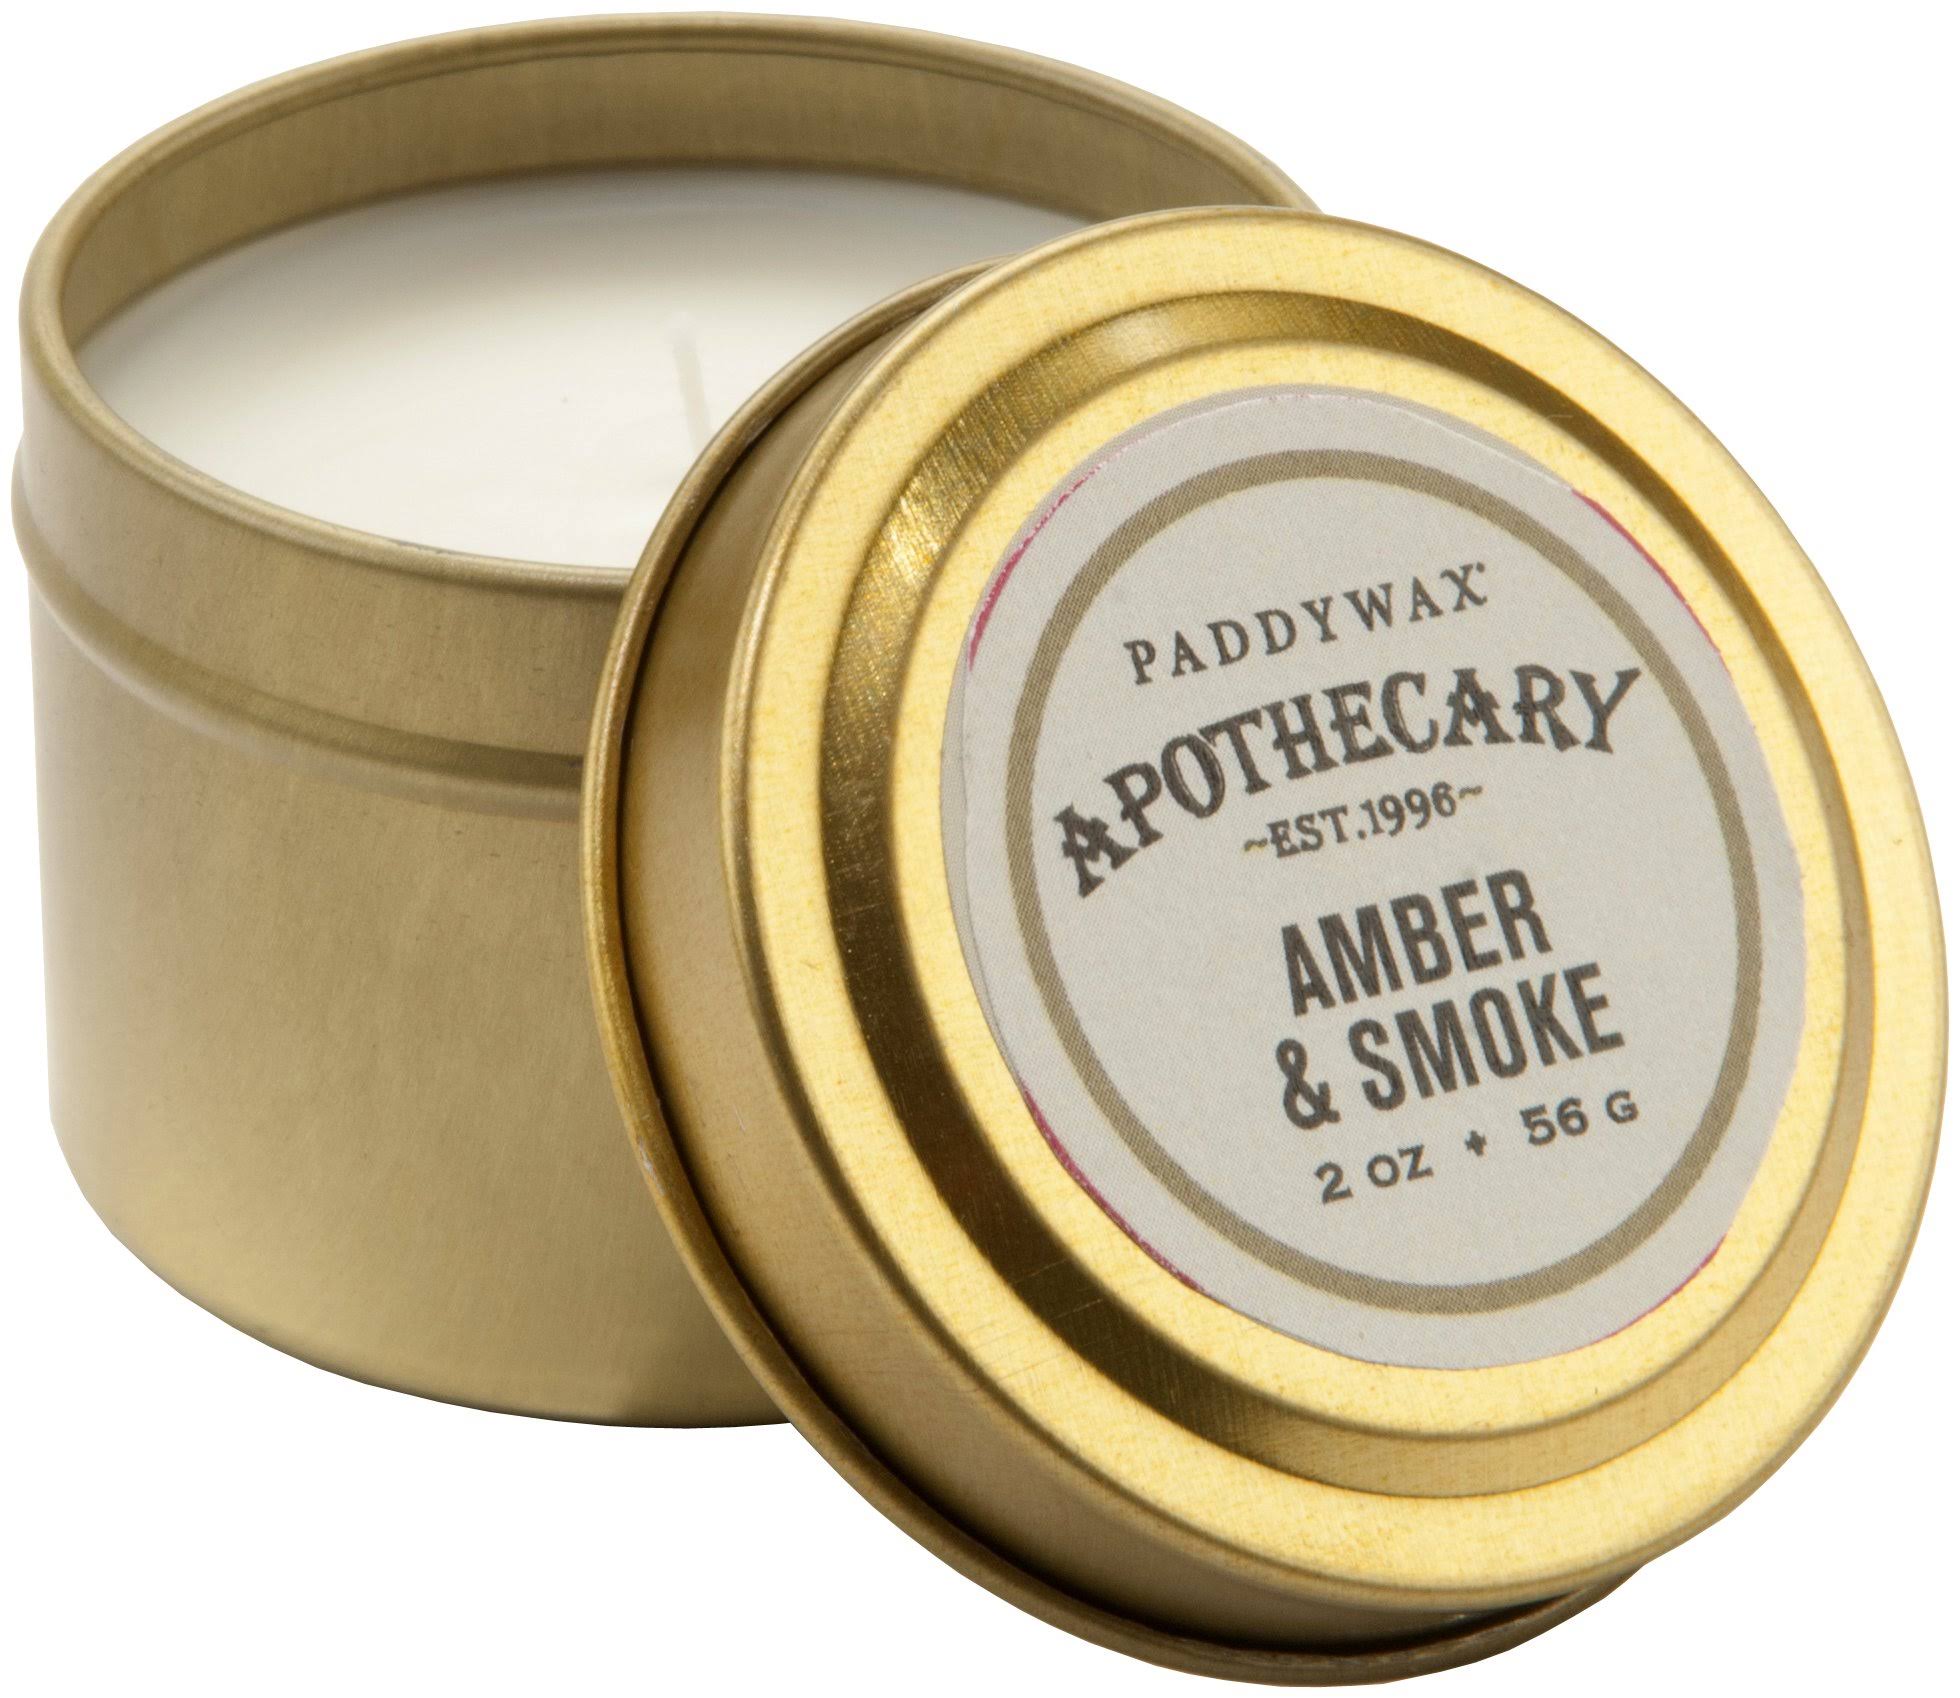 Paddywax Apothecary Collection Candle Travel Tin - Amber and Smoke